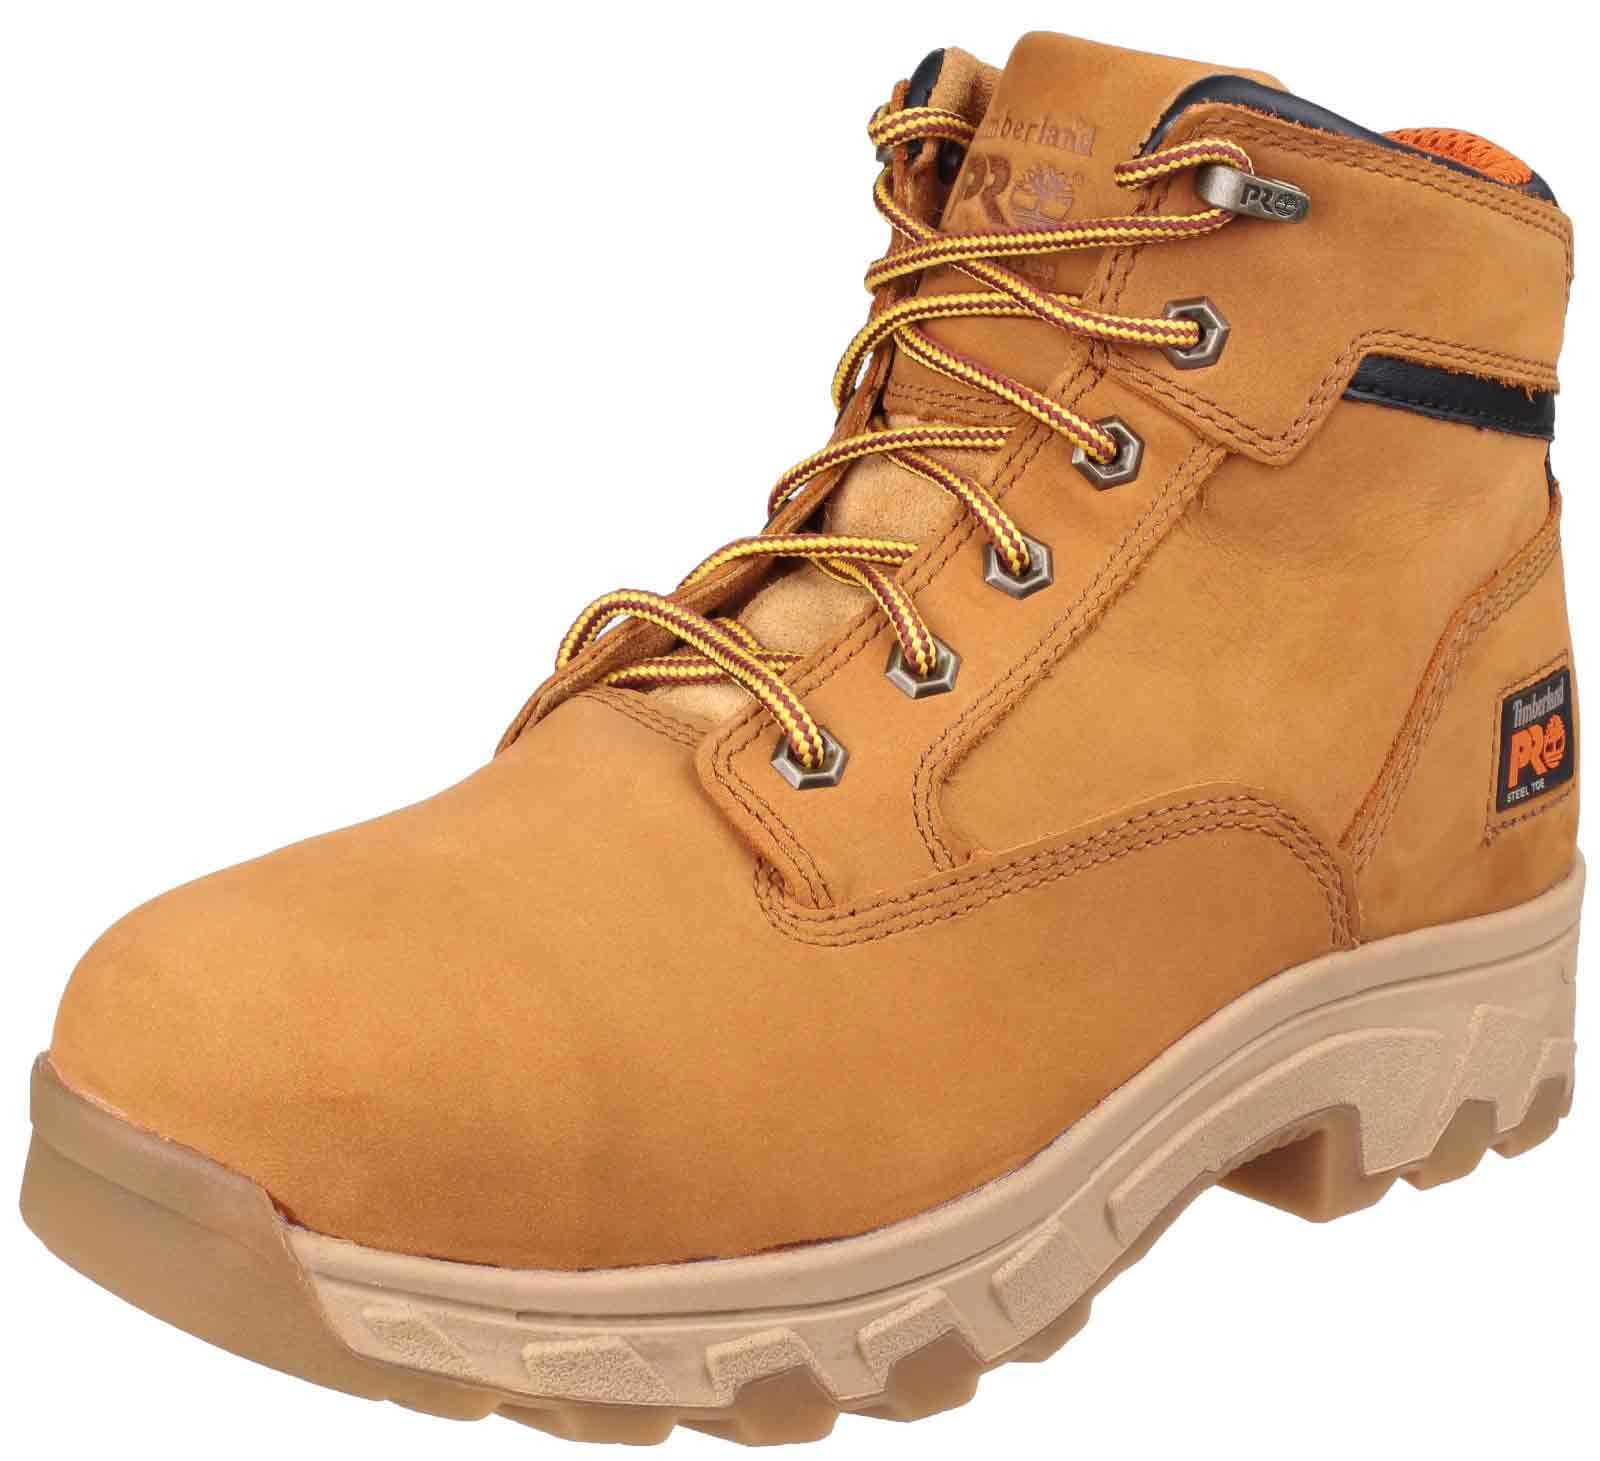 Timberland Pro Workwear Workstead Water Resistant Lace up Safety Boot -  Standard Safety Boots - Mens Safety Boots & Shoes - Safety Footwear - Best  Workwear